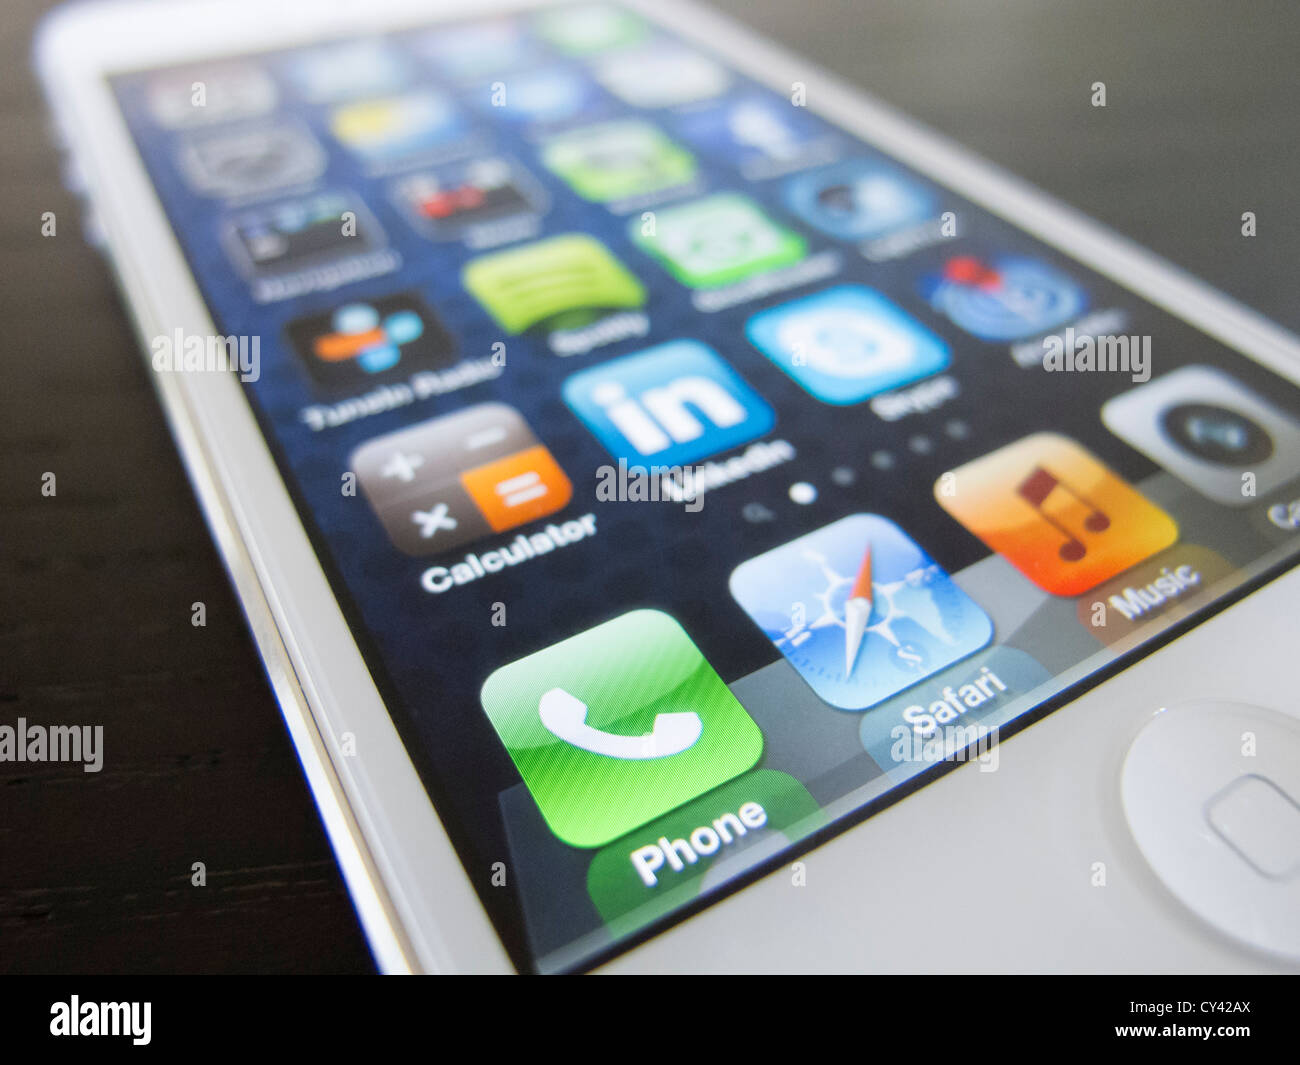 Detail of new iPhone5 smart phone screen showing many homescreen apps Stock Photo